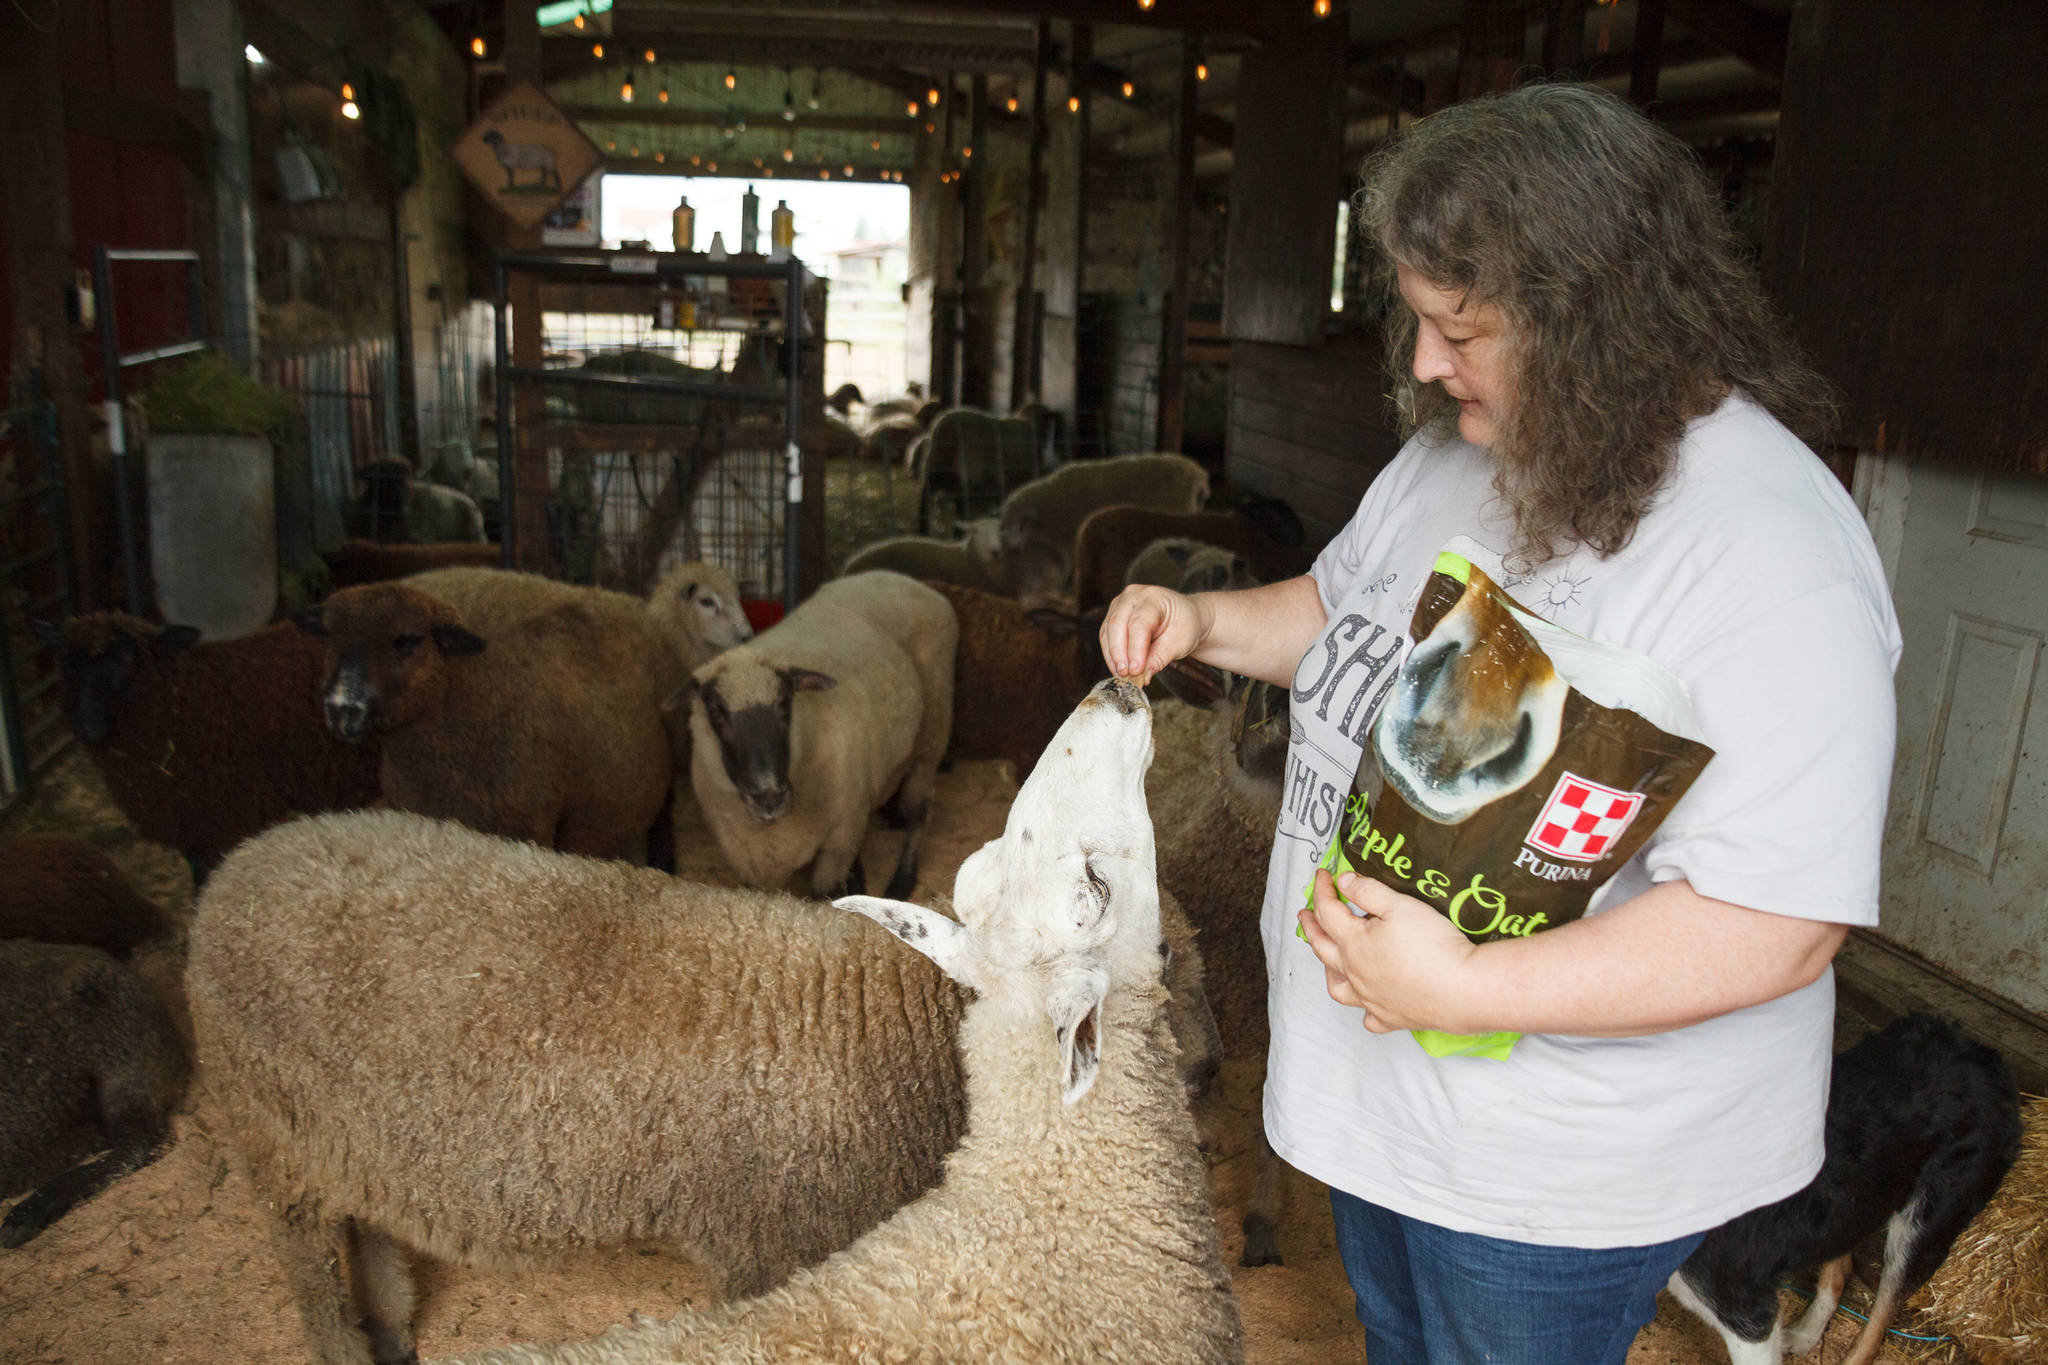 Carolynn Bernard, owner and operator of Bless Ewe Sheep Company feeds one of the sheep on her farm in Enumclaw on Aug. 17, 2021. Photo by Henry Stewart-Wood/Sound Publishing